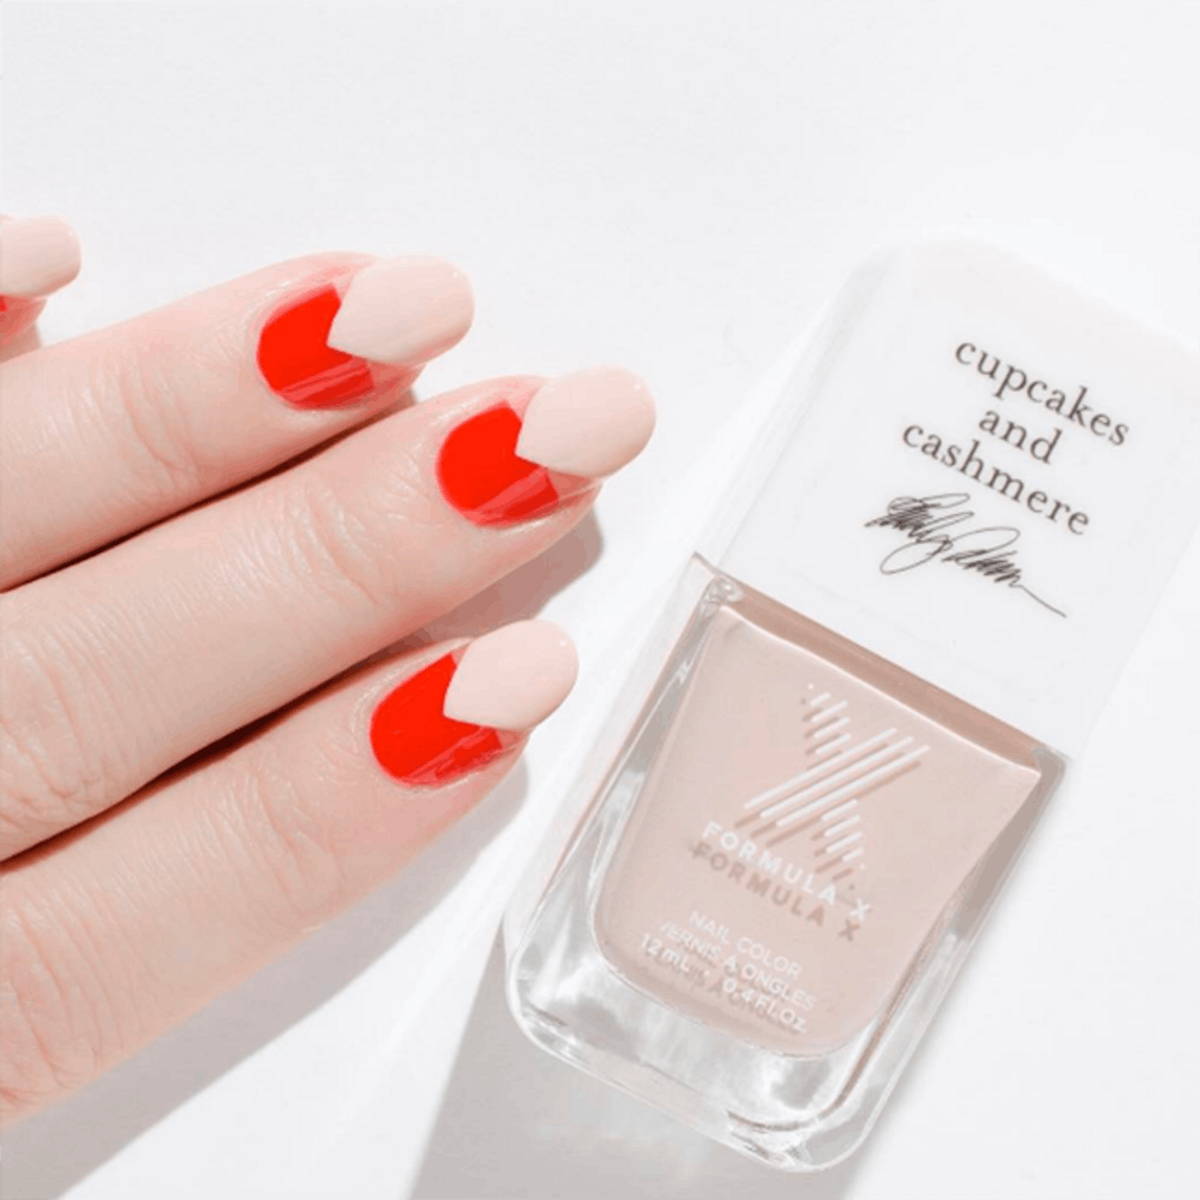 7 Valentine’s Day Nail Art Designs That Will Make Your Date Swoon